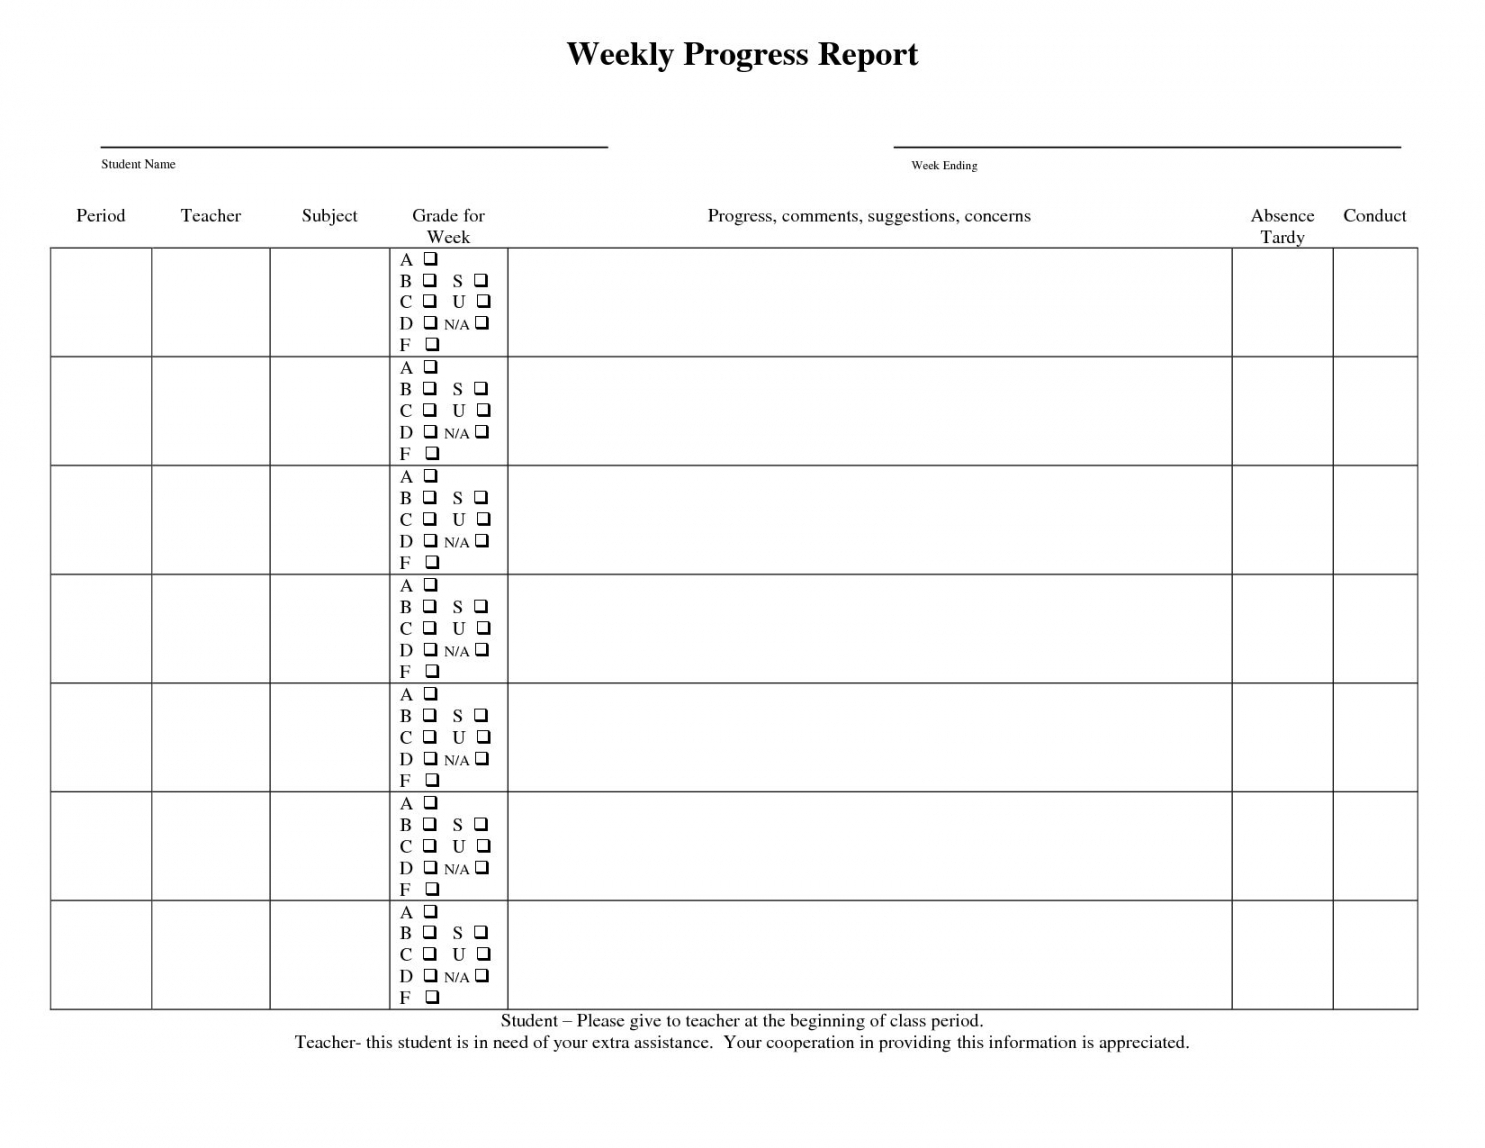 Daily Progress Report Format Excel Construction Glendale Regarding Construction Daily Progress Report Template